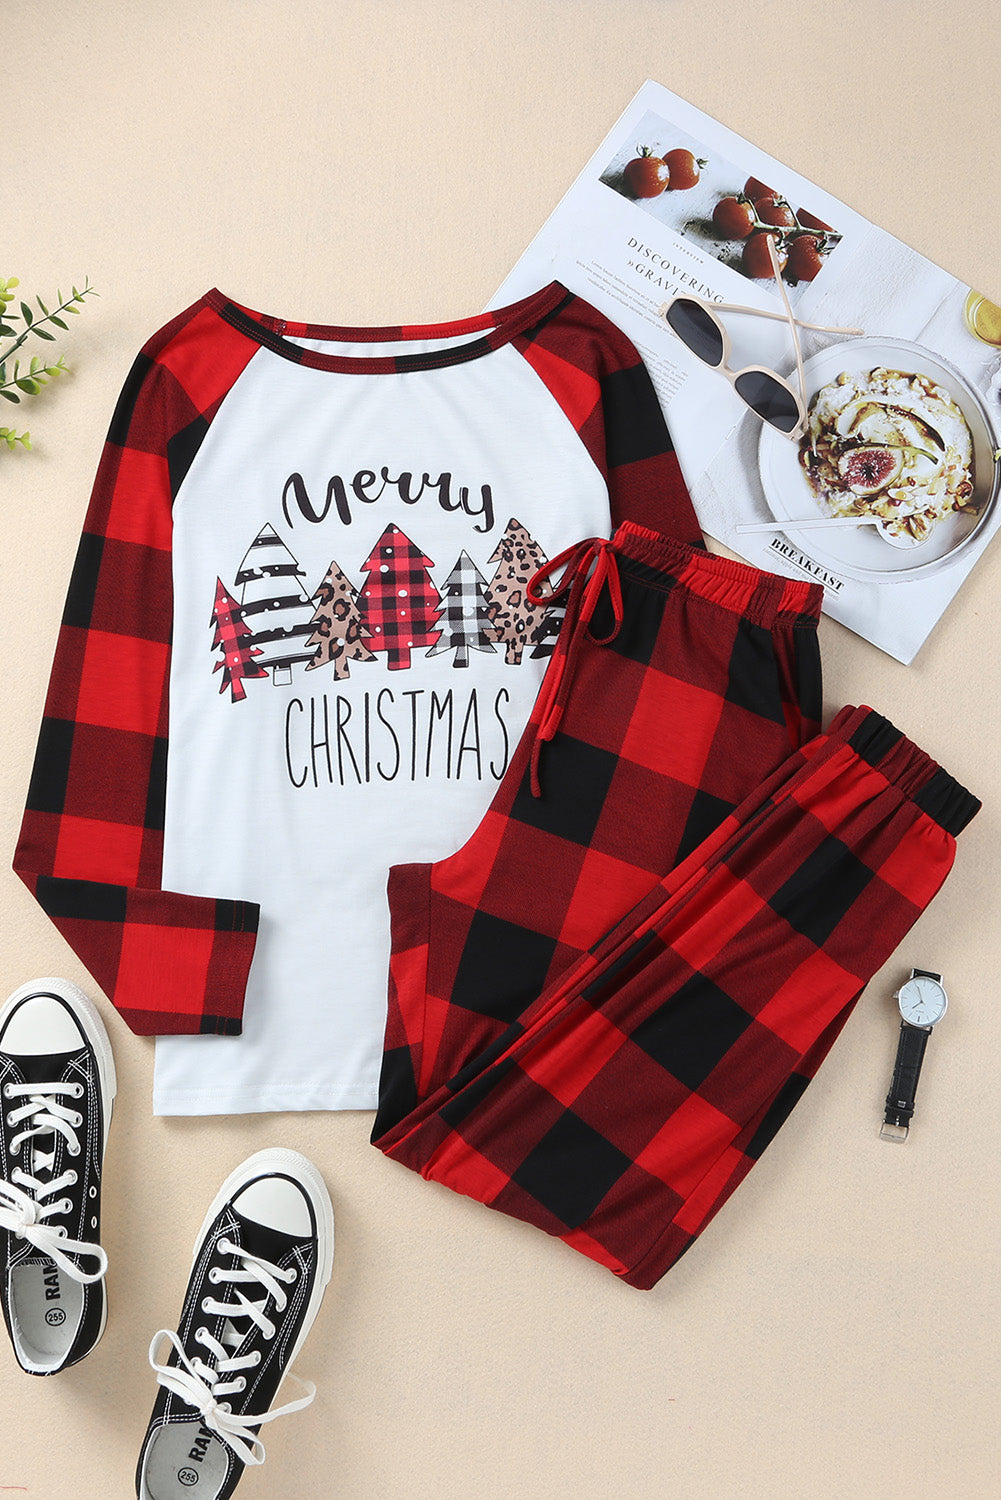 Fiery Red Plaid Merry Christmas Graphic Loungewear Set